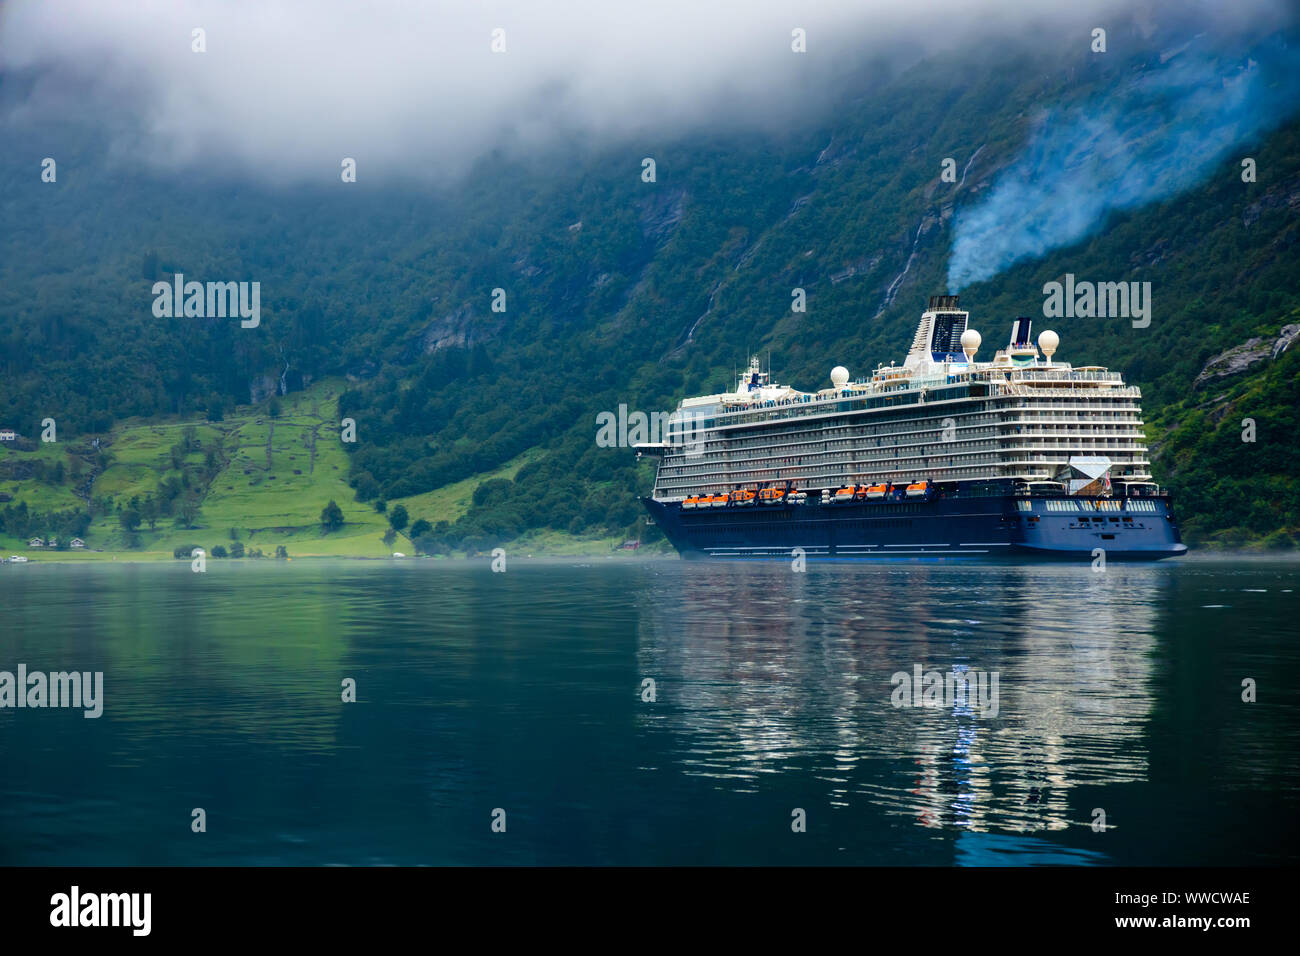 Cruise Ship, Cruise Liners On Geiranger fjord, Norway. The fjord is one of Norway's most visited tourist sites. Geiranger Fjord, a UNESCO World Herita Stock Photo